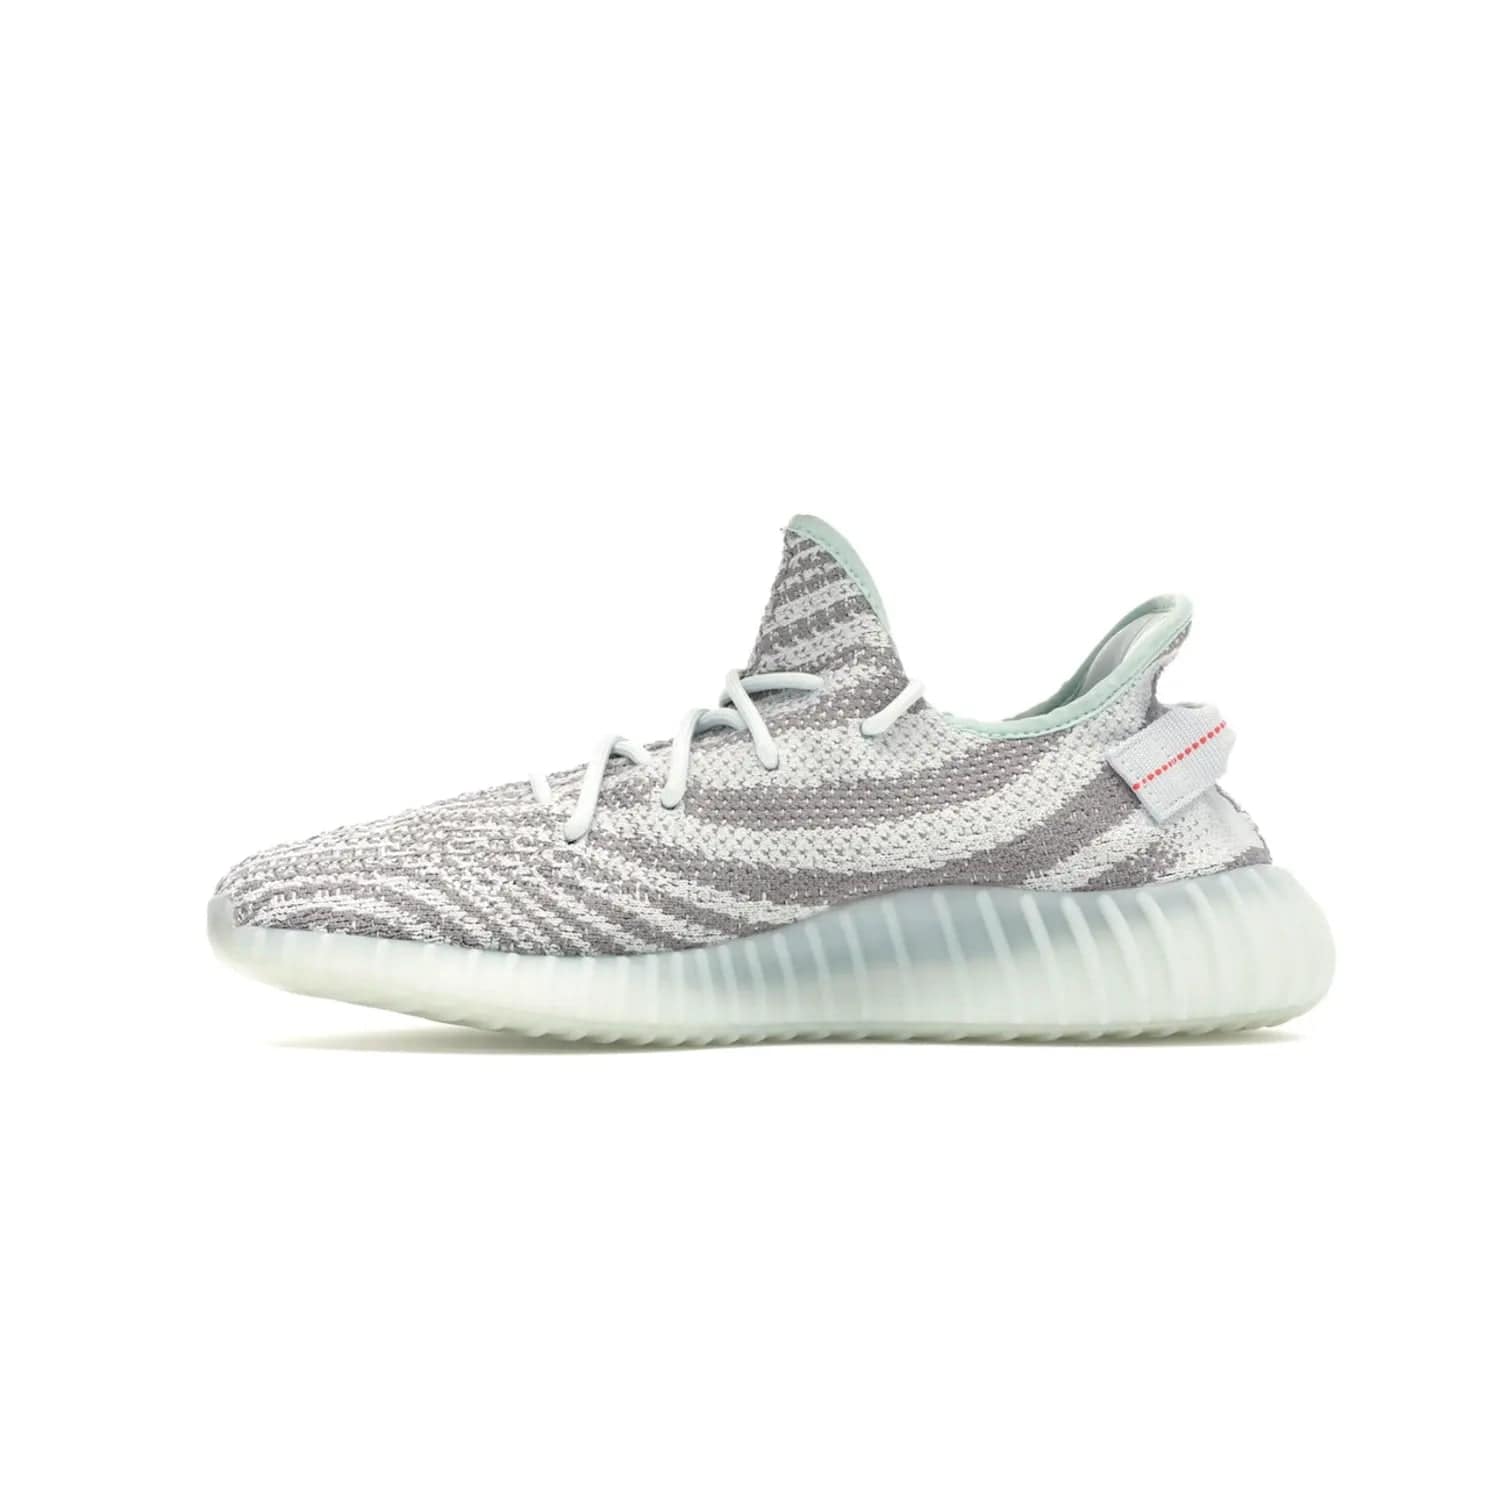 adidas Yeezy Boost 350 V2 Blue Tint - Image 19 - Only at www.BallersClubKickz.com - The adidas Yeezy Boost 350 V2 Blue Tint merges fashion and functionality with its Primeknit upper and Boost sole. Released in December 2017, this luxurious sneaker is perfect for making a stylish statement.